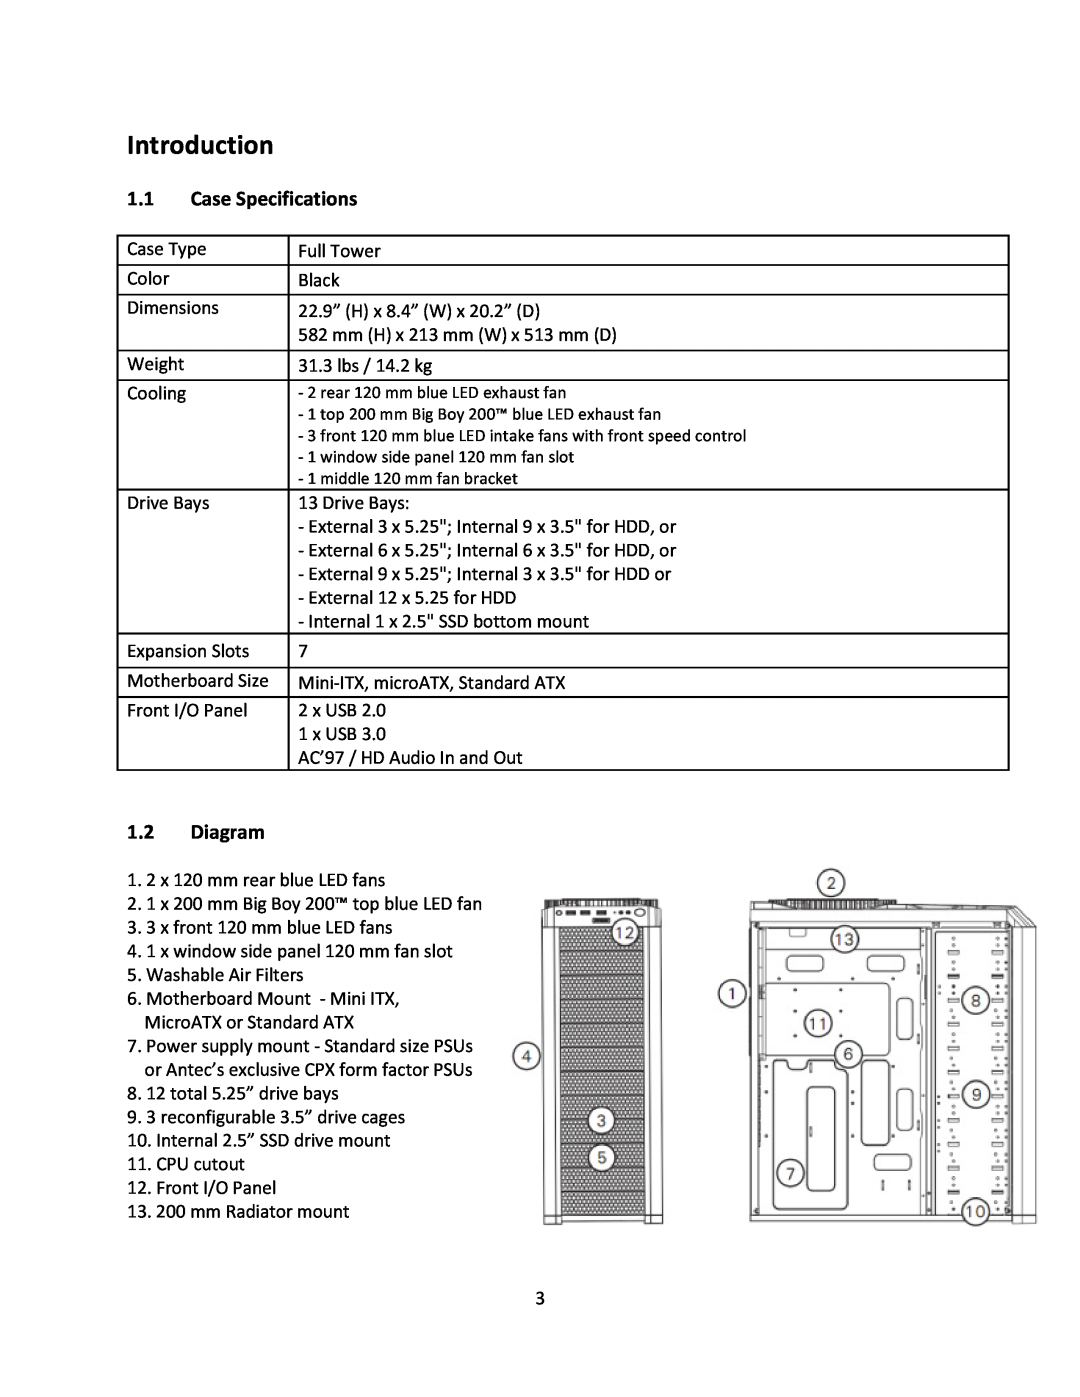 Antec V3 user manual Introduction, Case Specifications, Diagram 